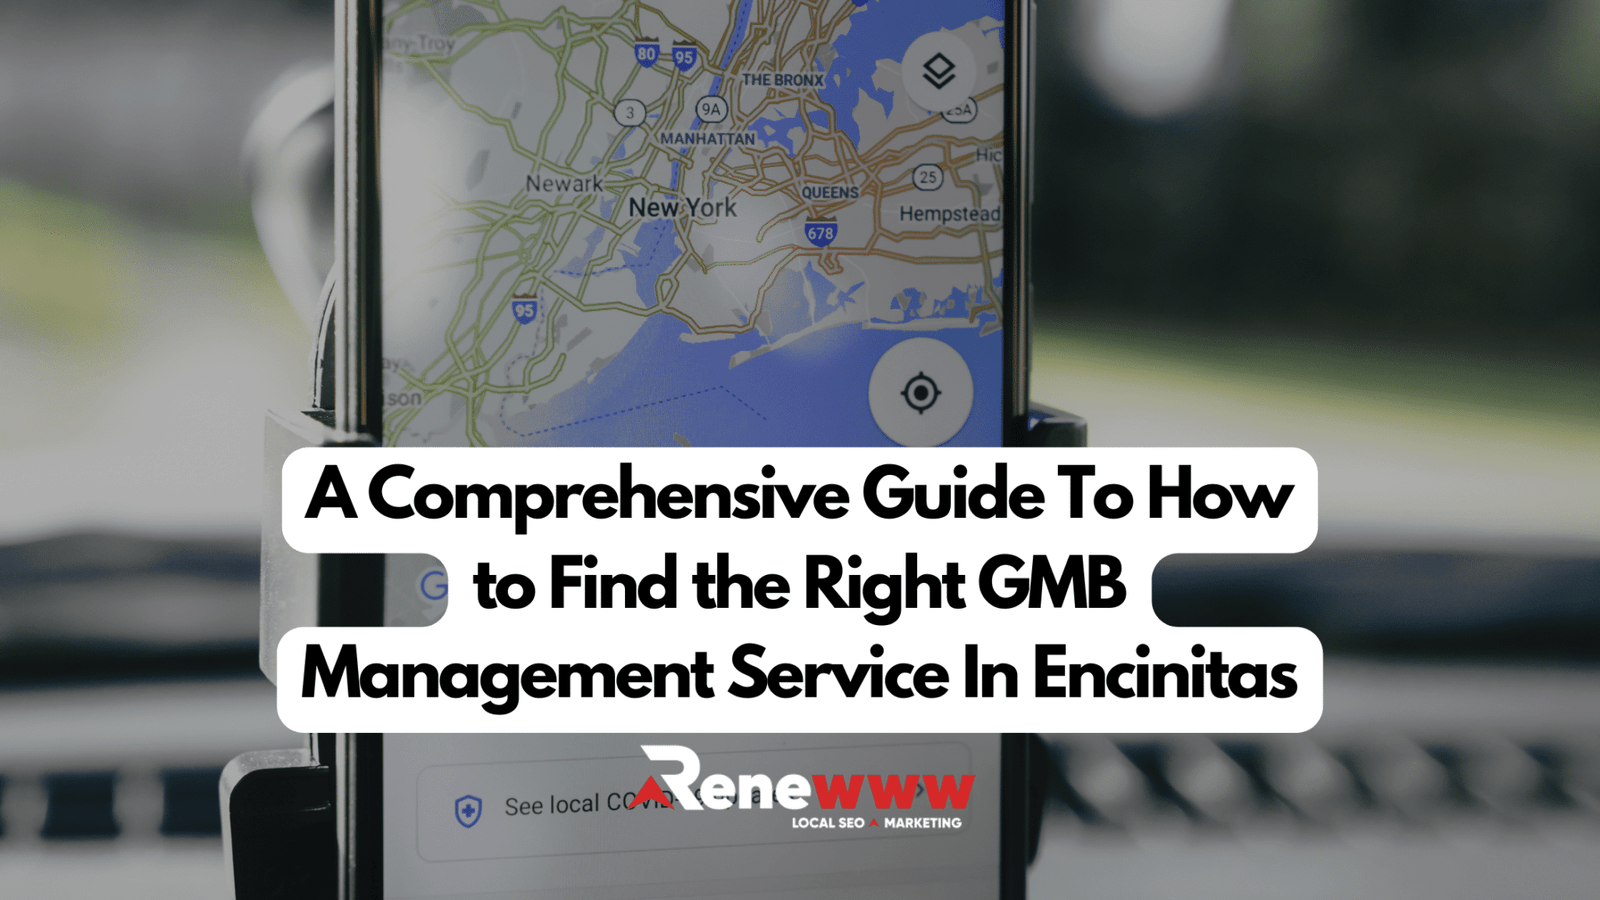 A Comprehensive Guide To How to Find the Right GMB Management Service In Encinitas